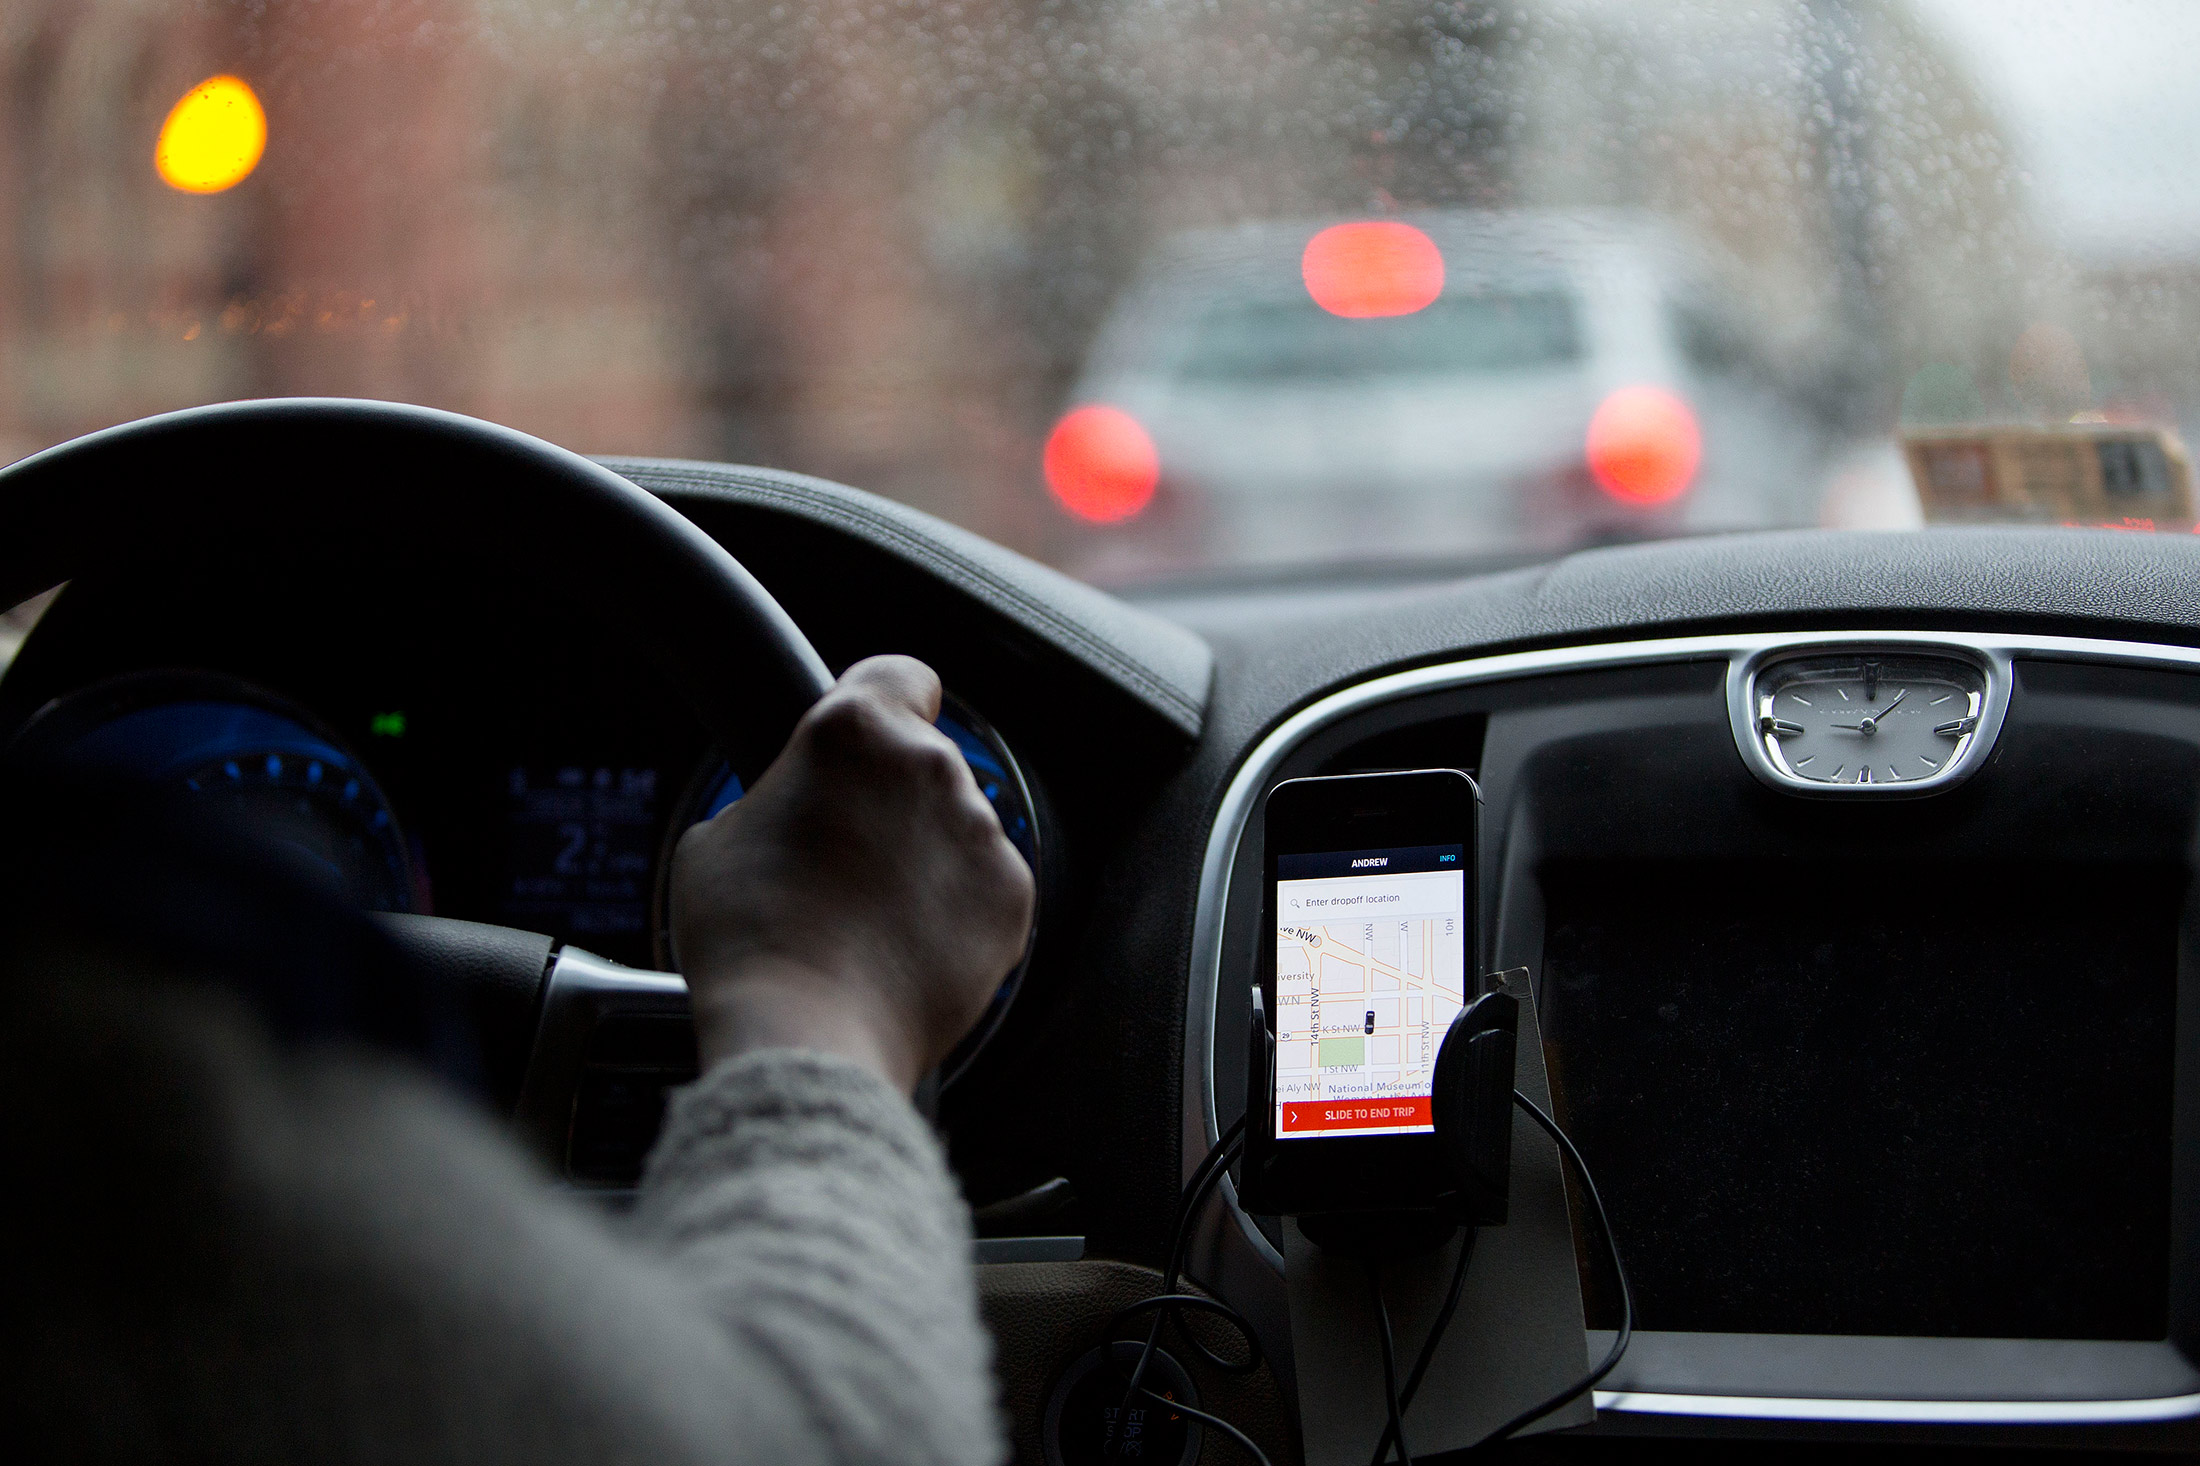 The Uber application runs on an Apple iPhone during an Uber ride in Washington, D.C., on April 8, 2015.
